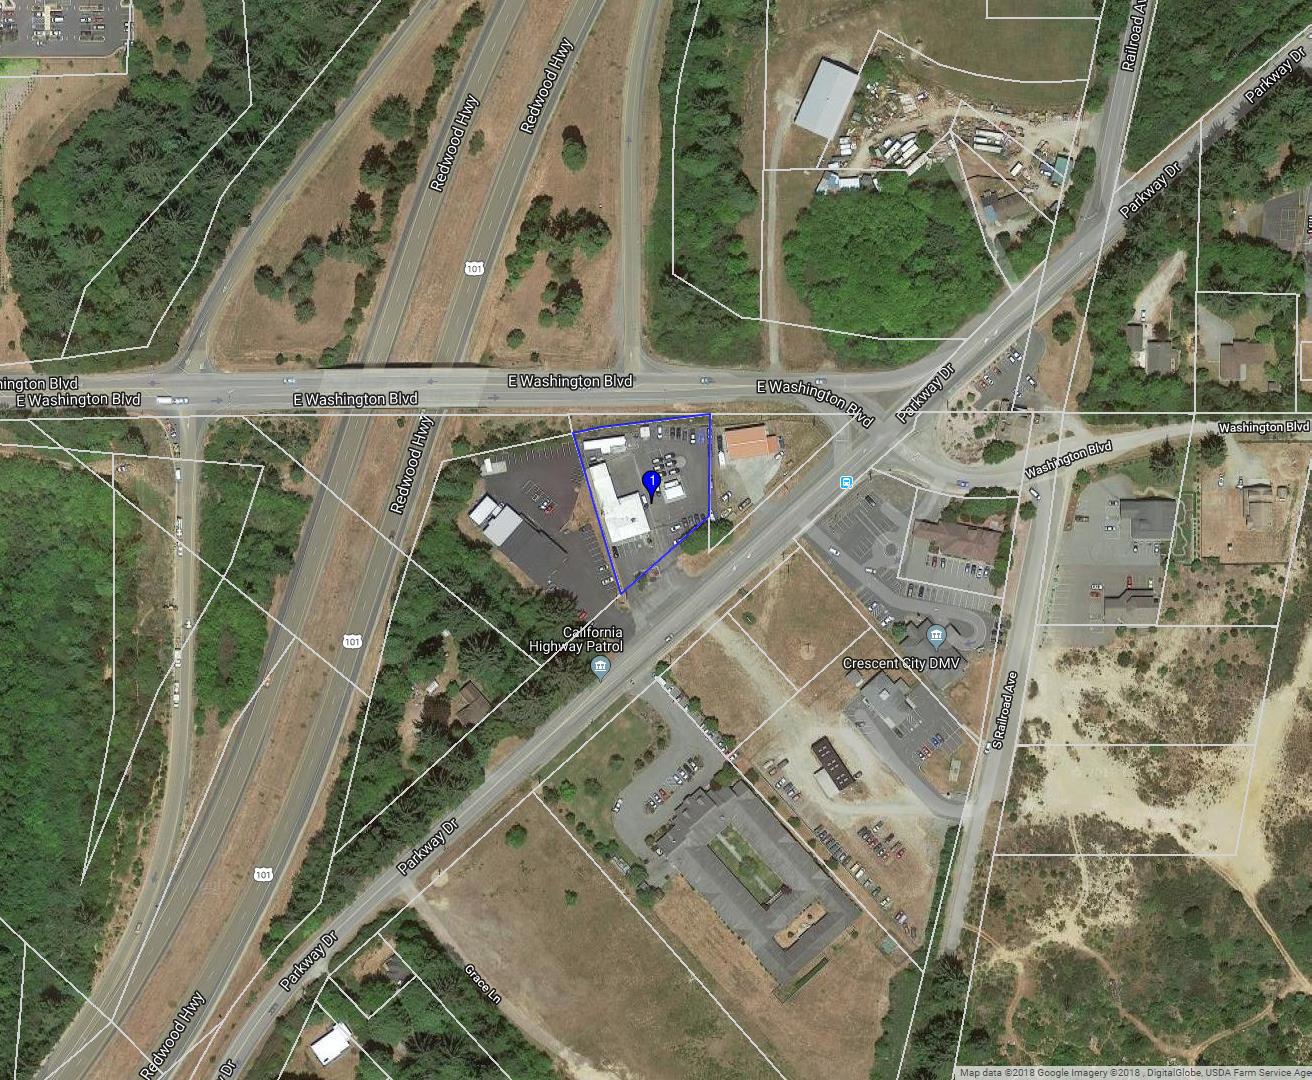 Aerial Map of Crescent City CHP with Blue Outline of Property